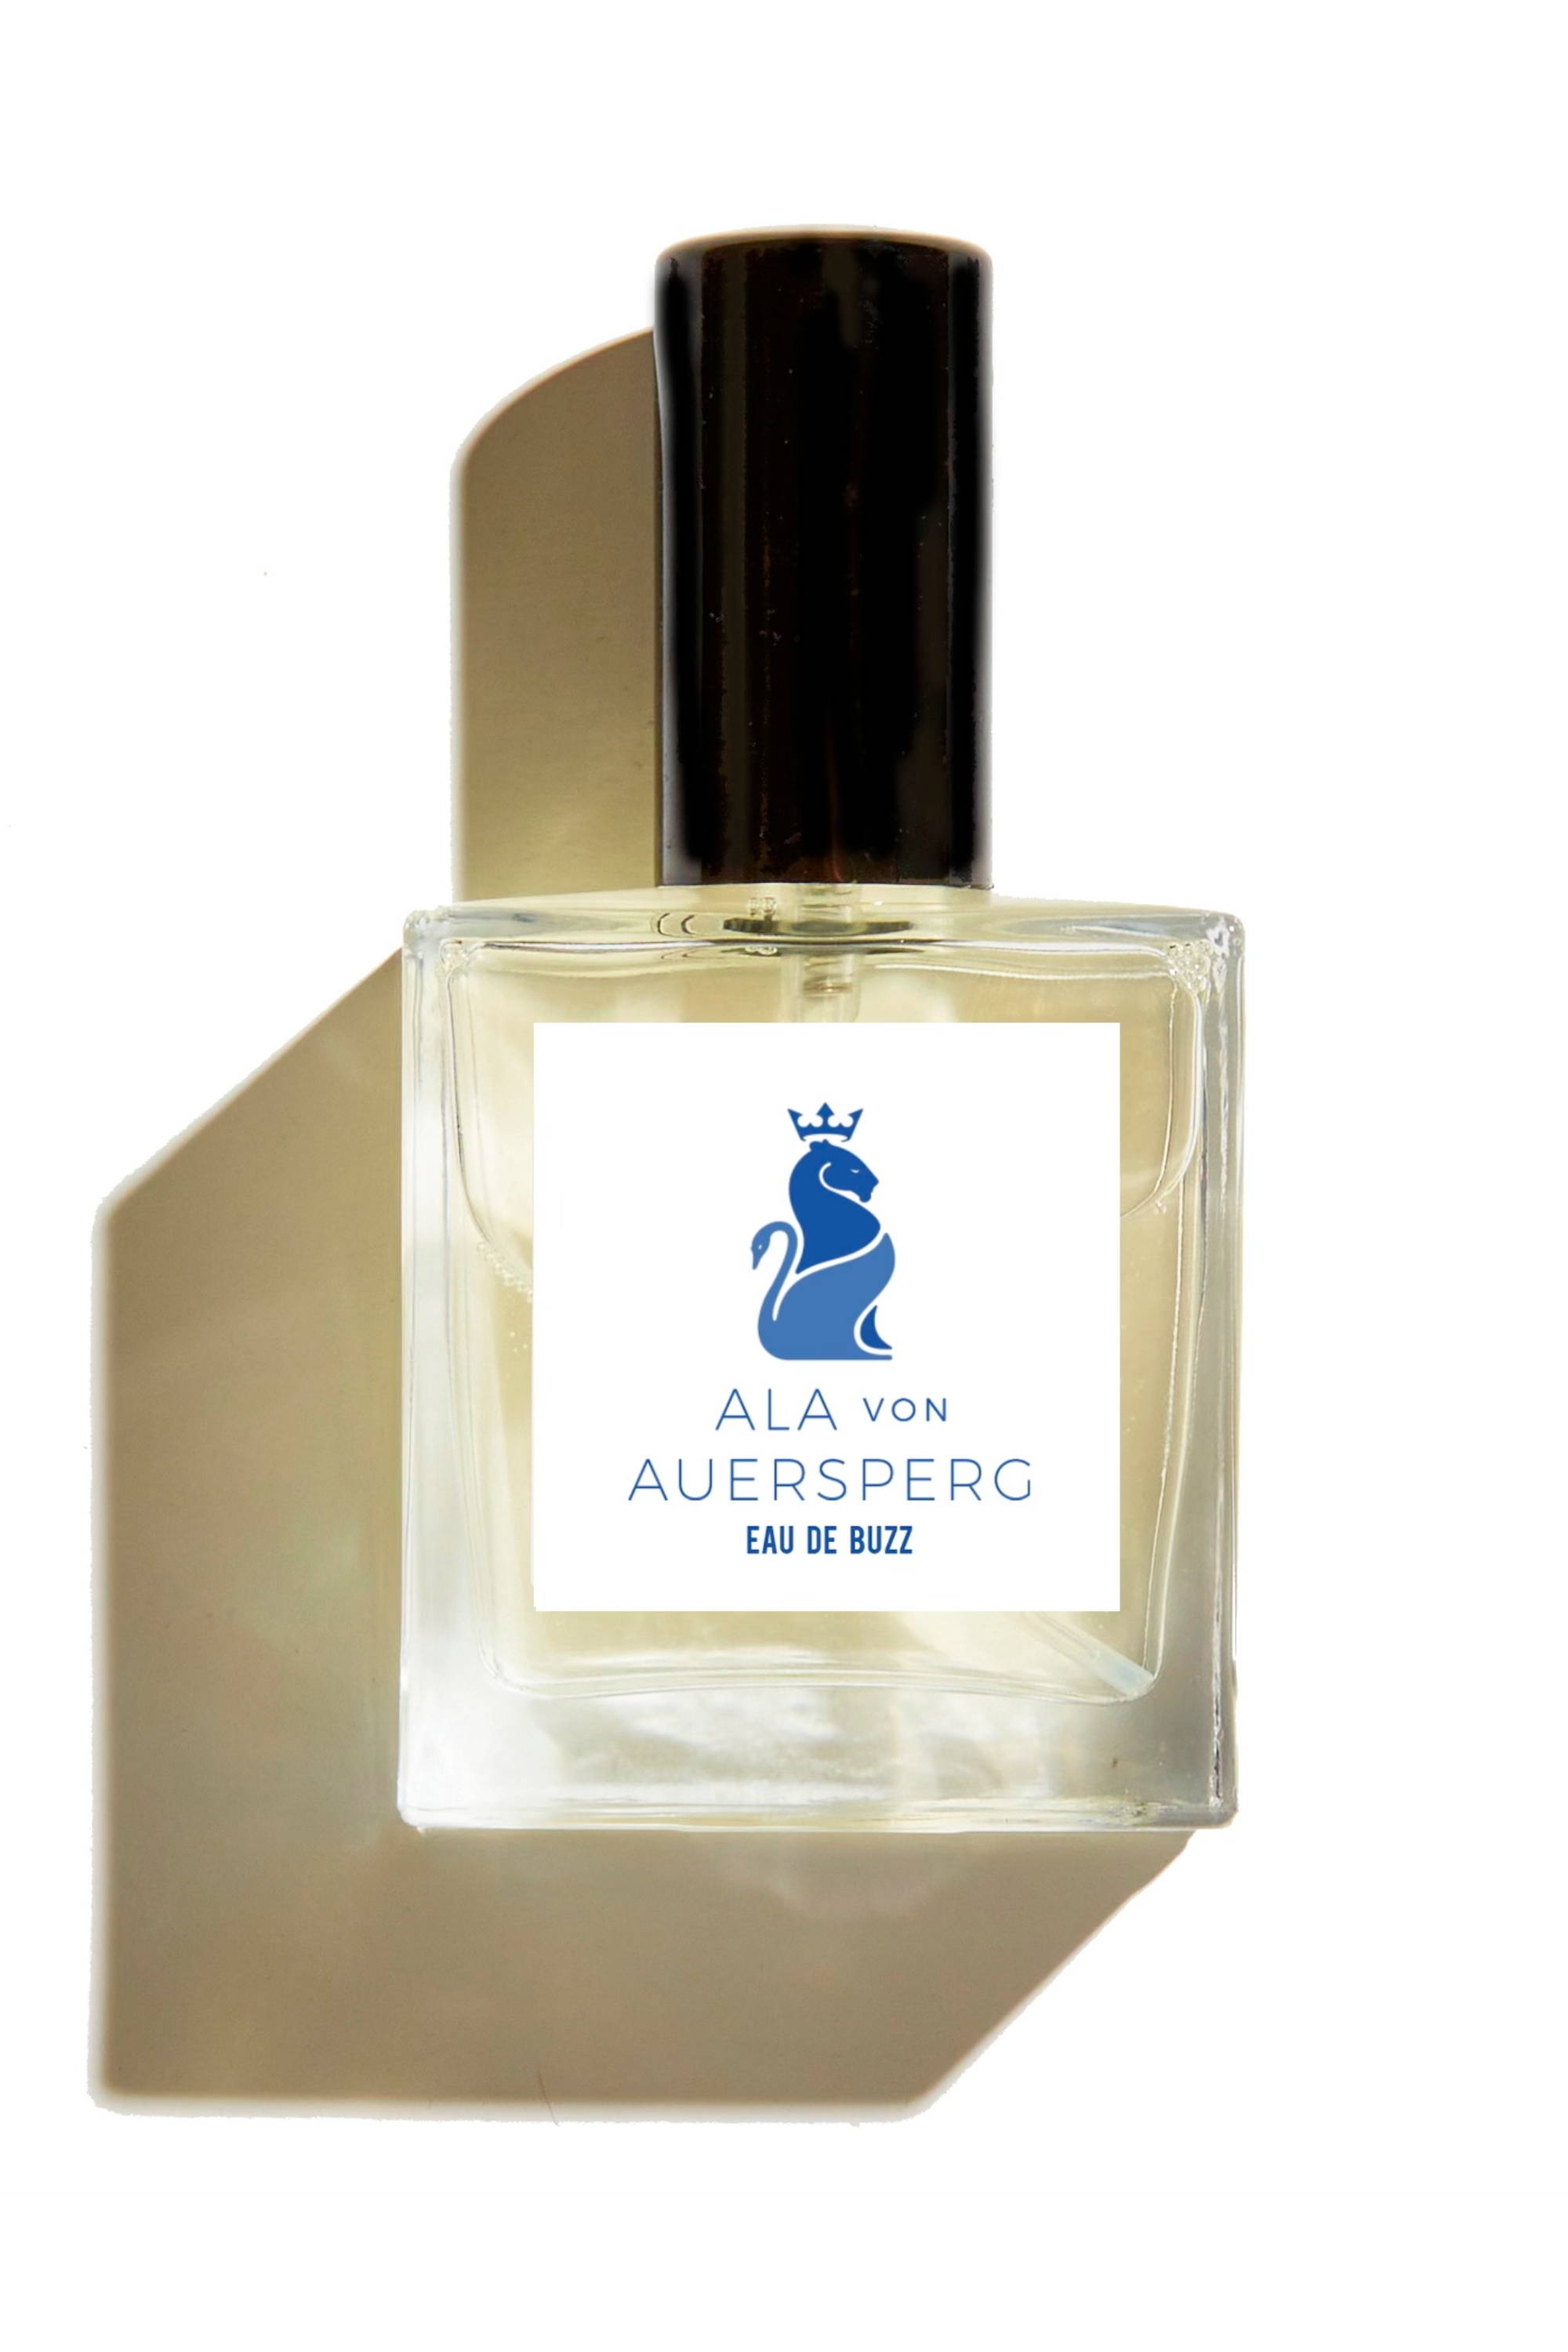 Bug repellent and perfume by Ala von Auersperg and The Buzz Skin